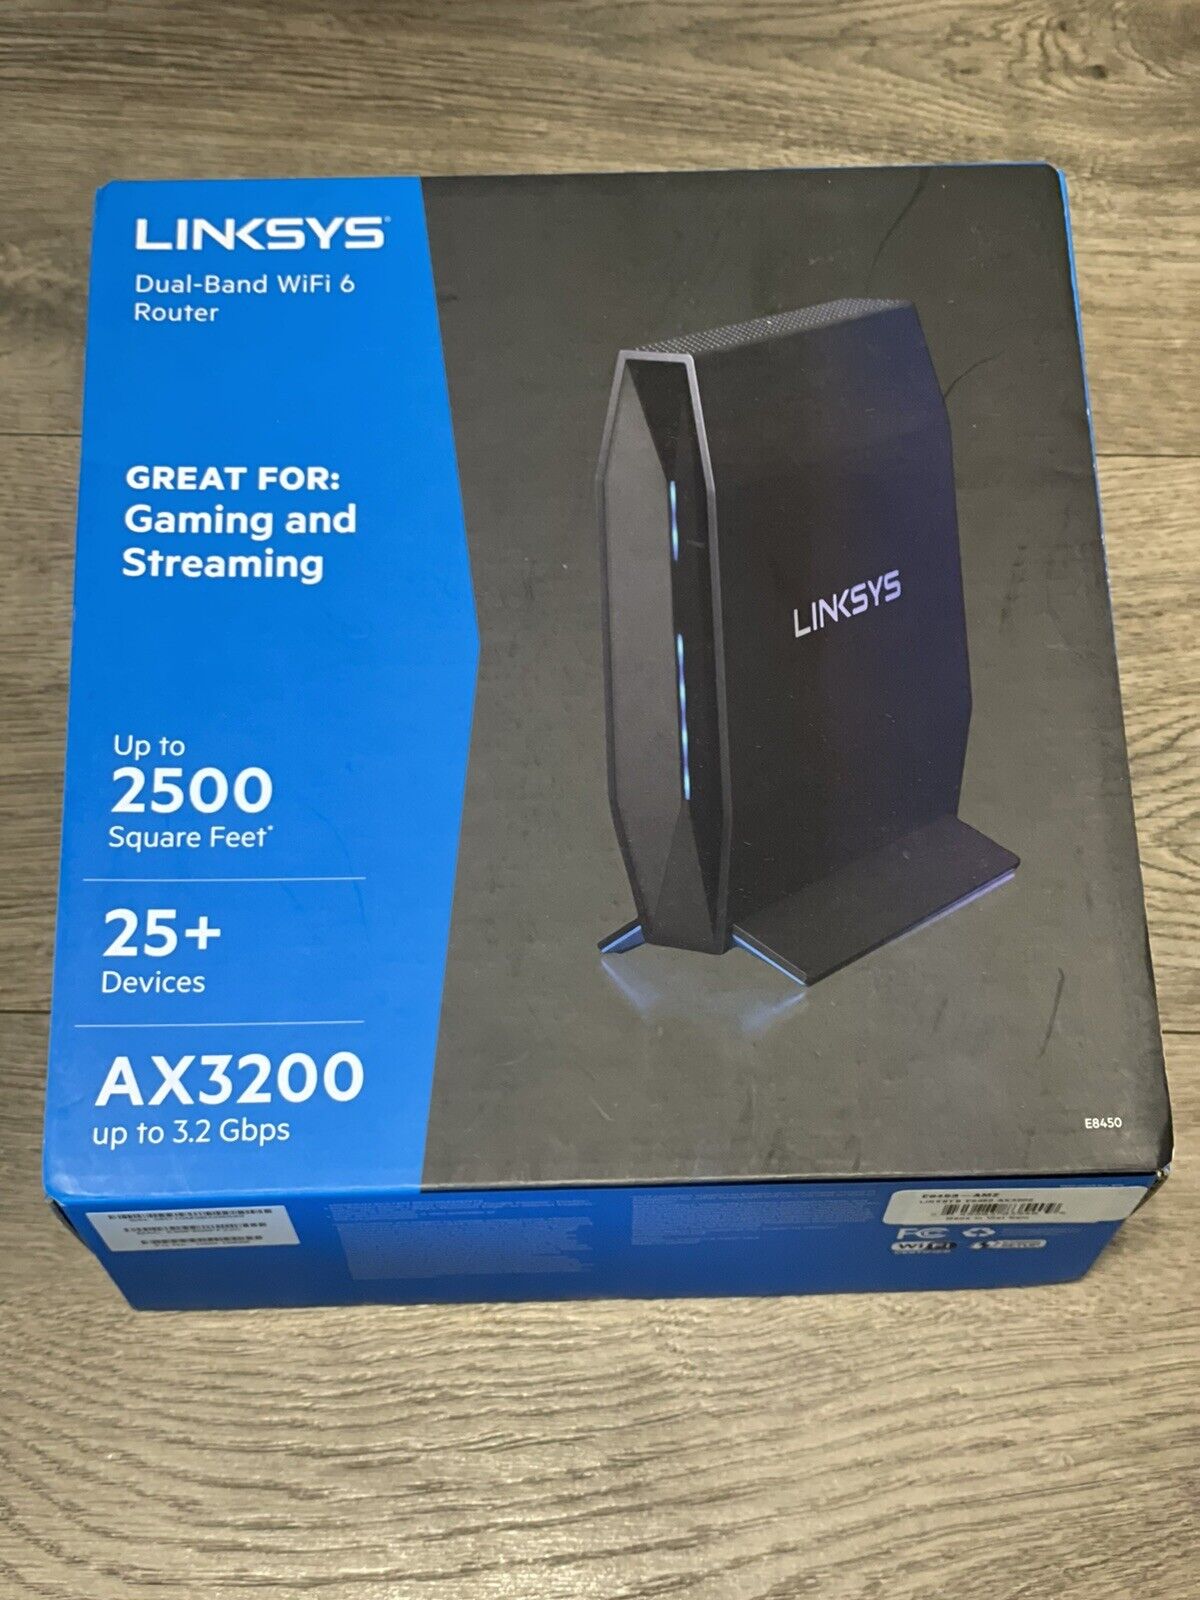 LINKSYS E8450,WIRELESS ROUTER, 4 PORT GIGE, WI-FI 6, DUAL BAND NEW OPEN BOX